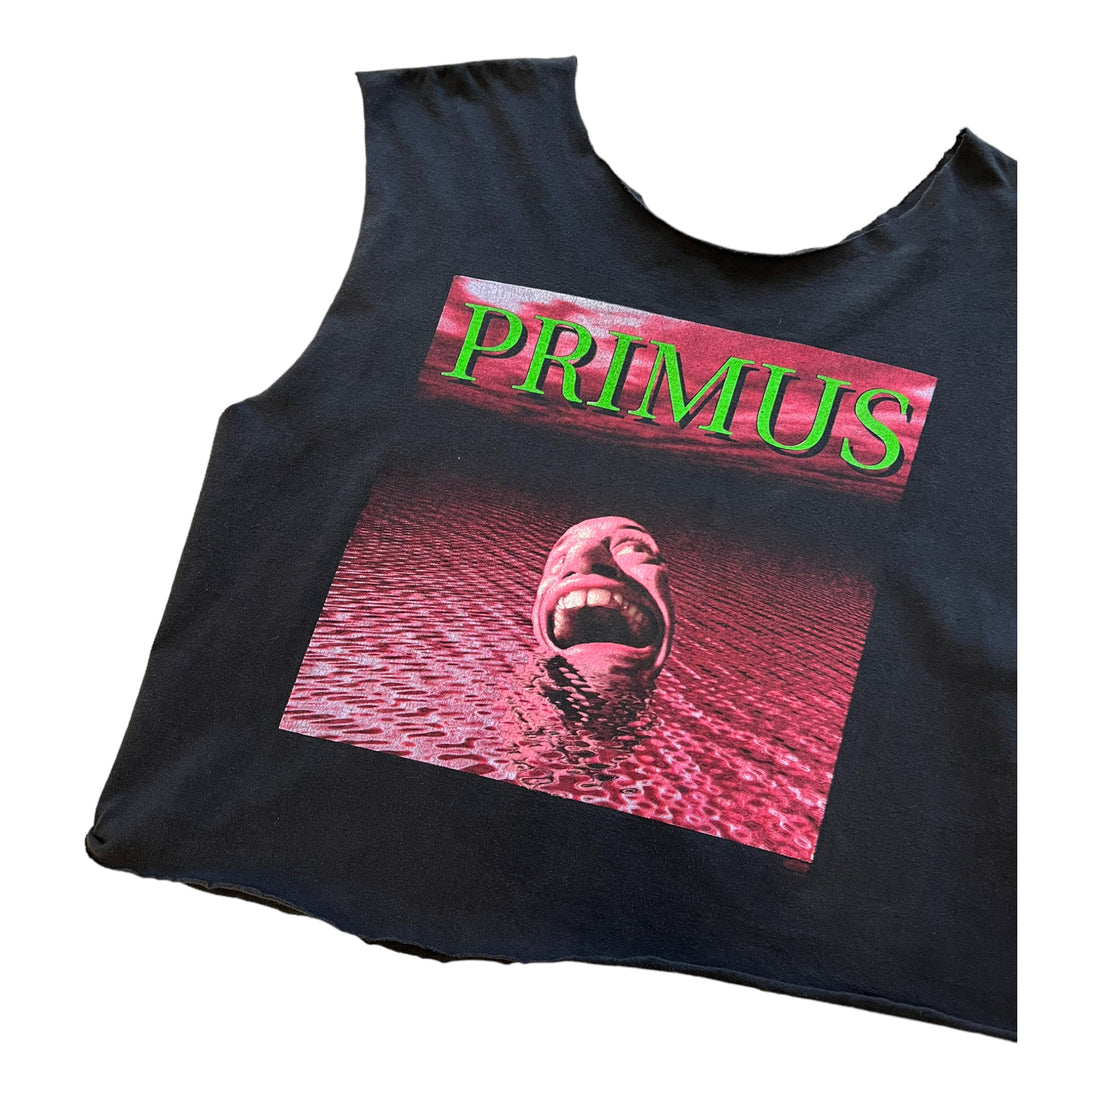 1996 PRIMUS CROPPED CUT OFF T-SHIRT BLACK LARGE - 1990S